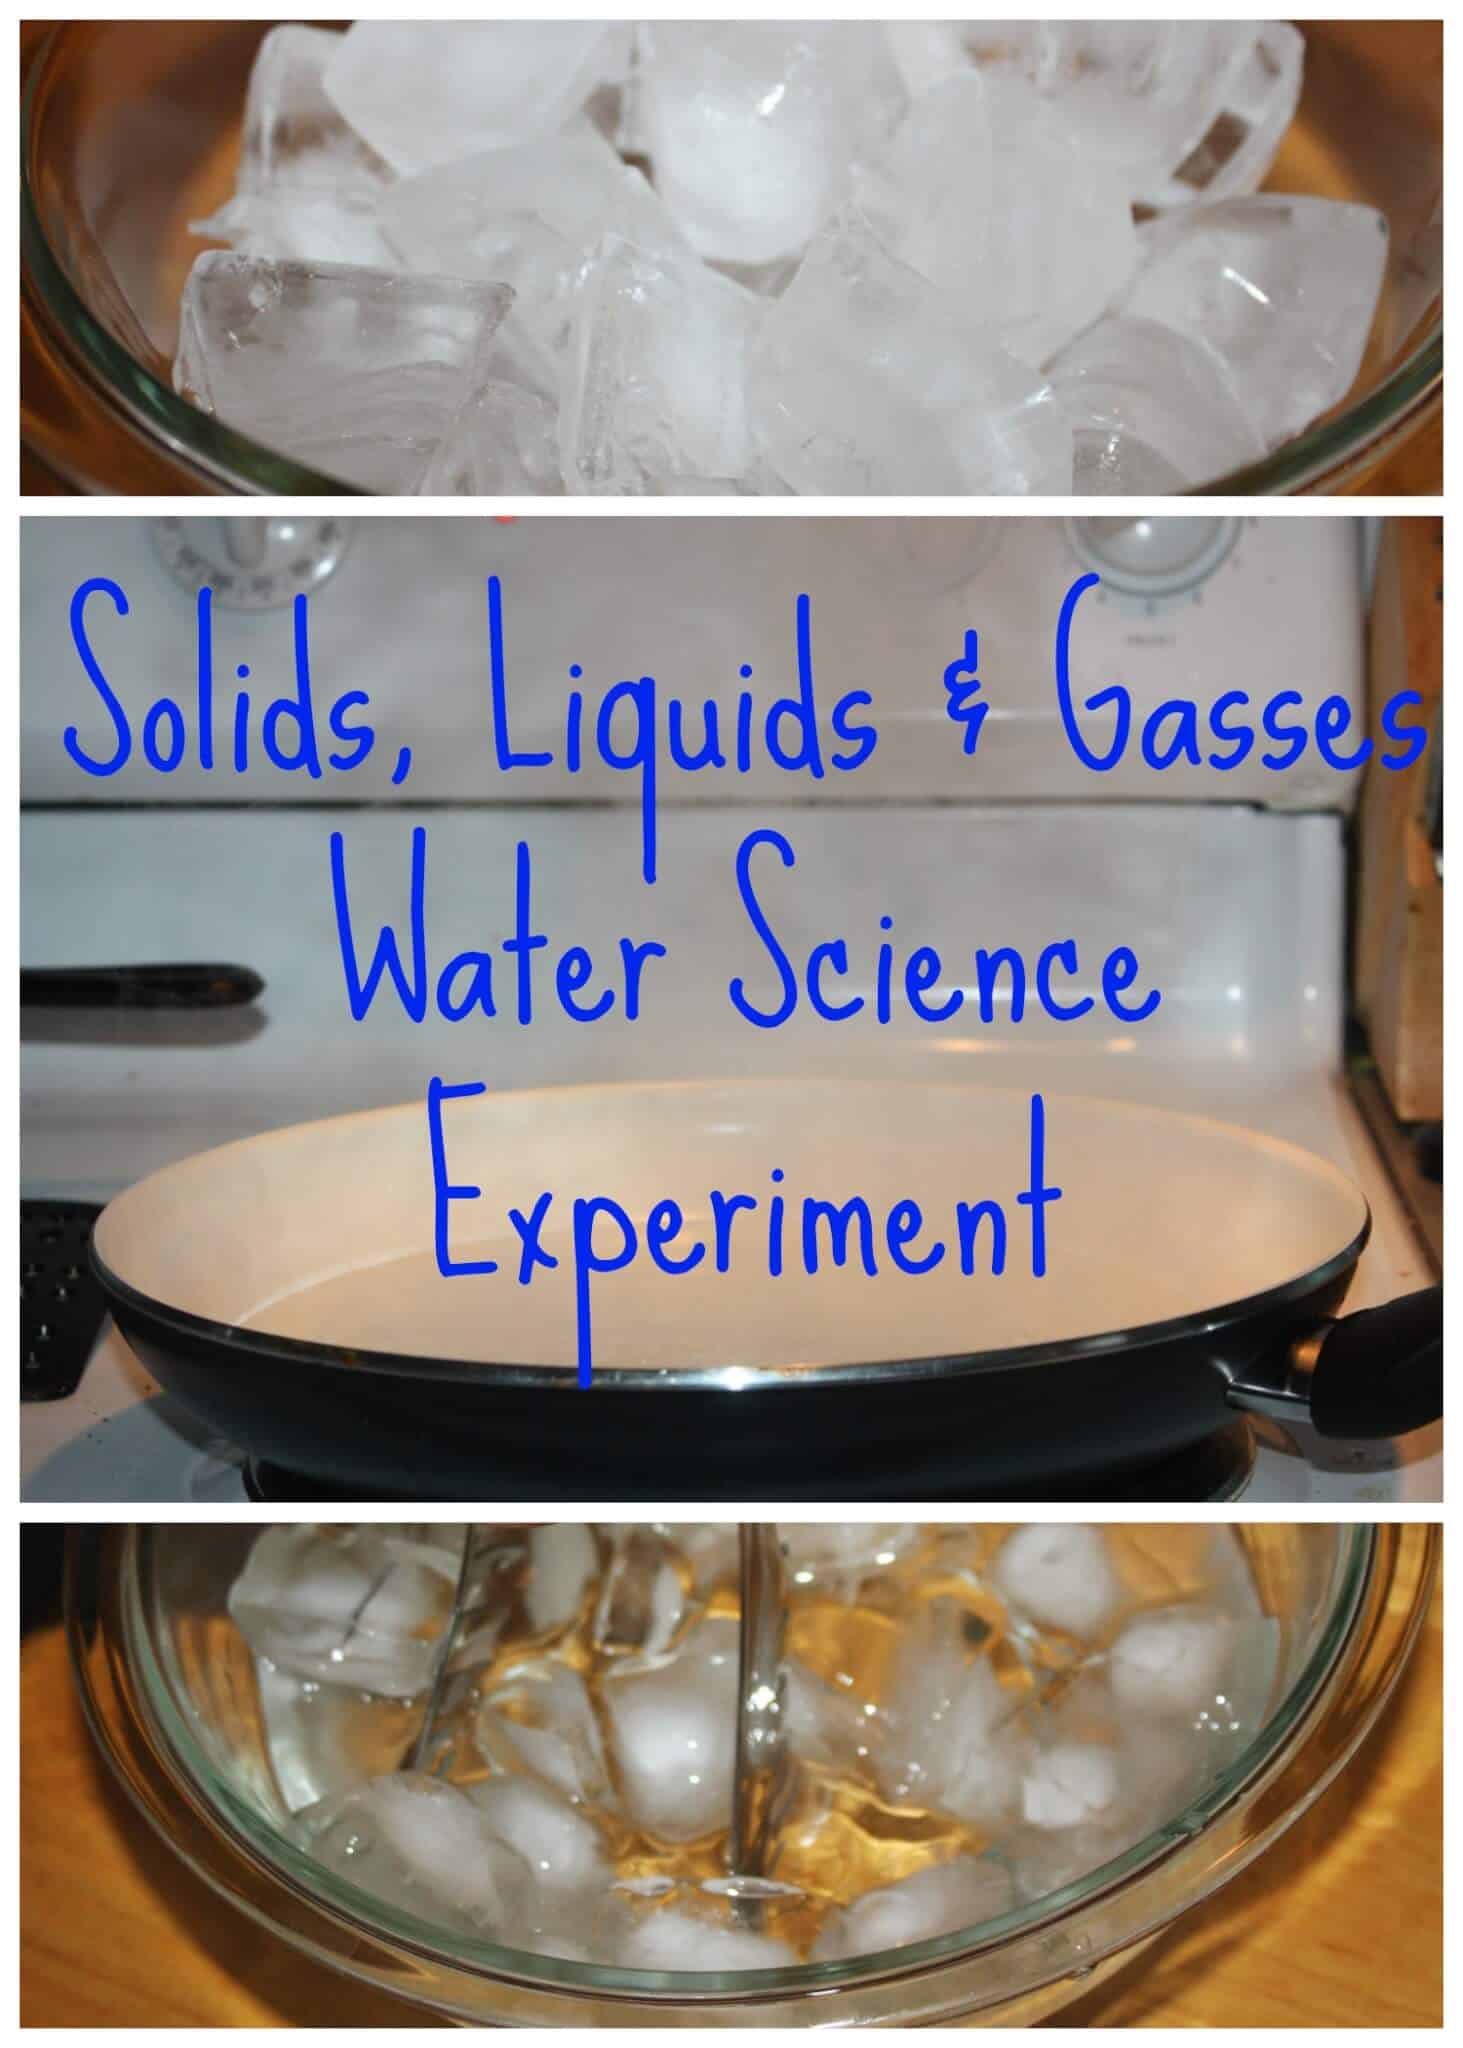 Properties of gases experiment